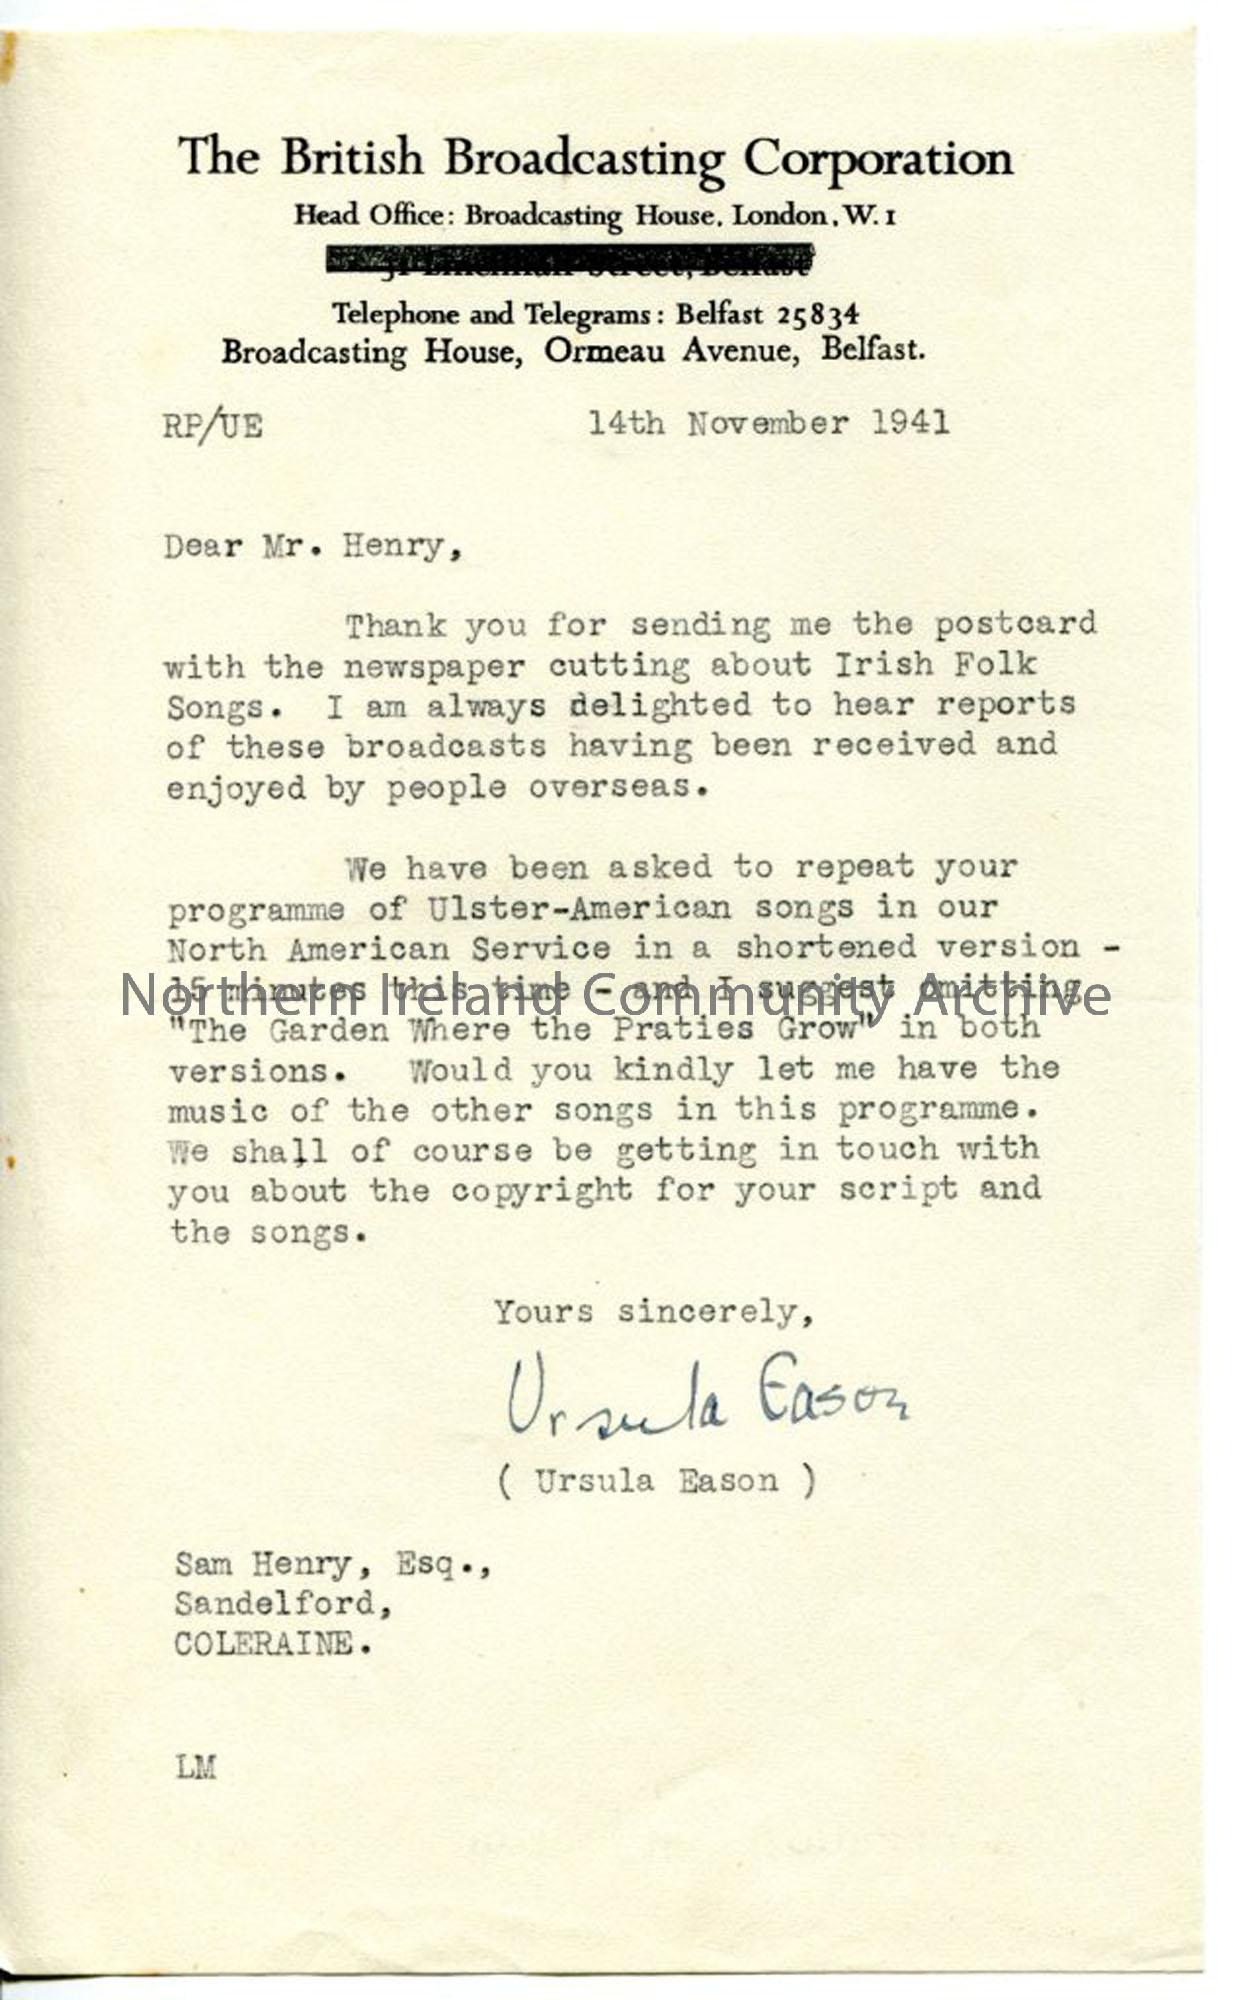 Letter from Ursula Eason, dated 14.11.1941